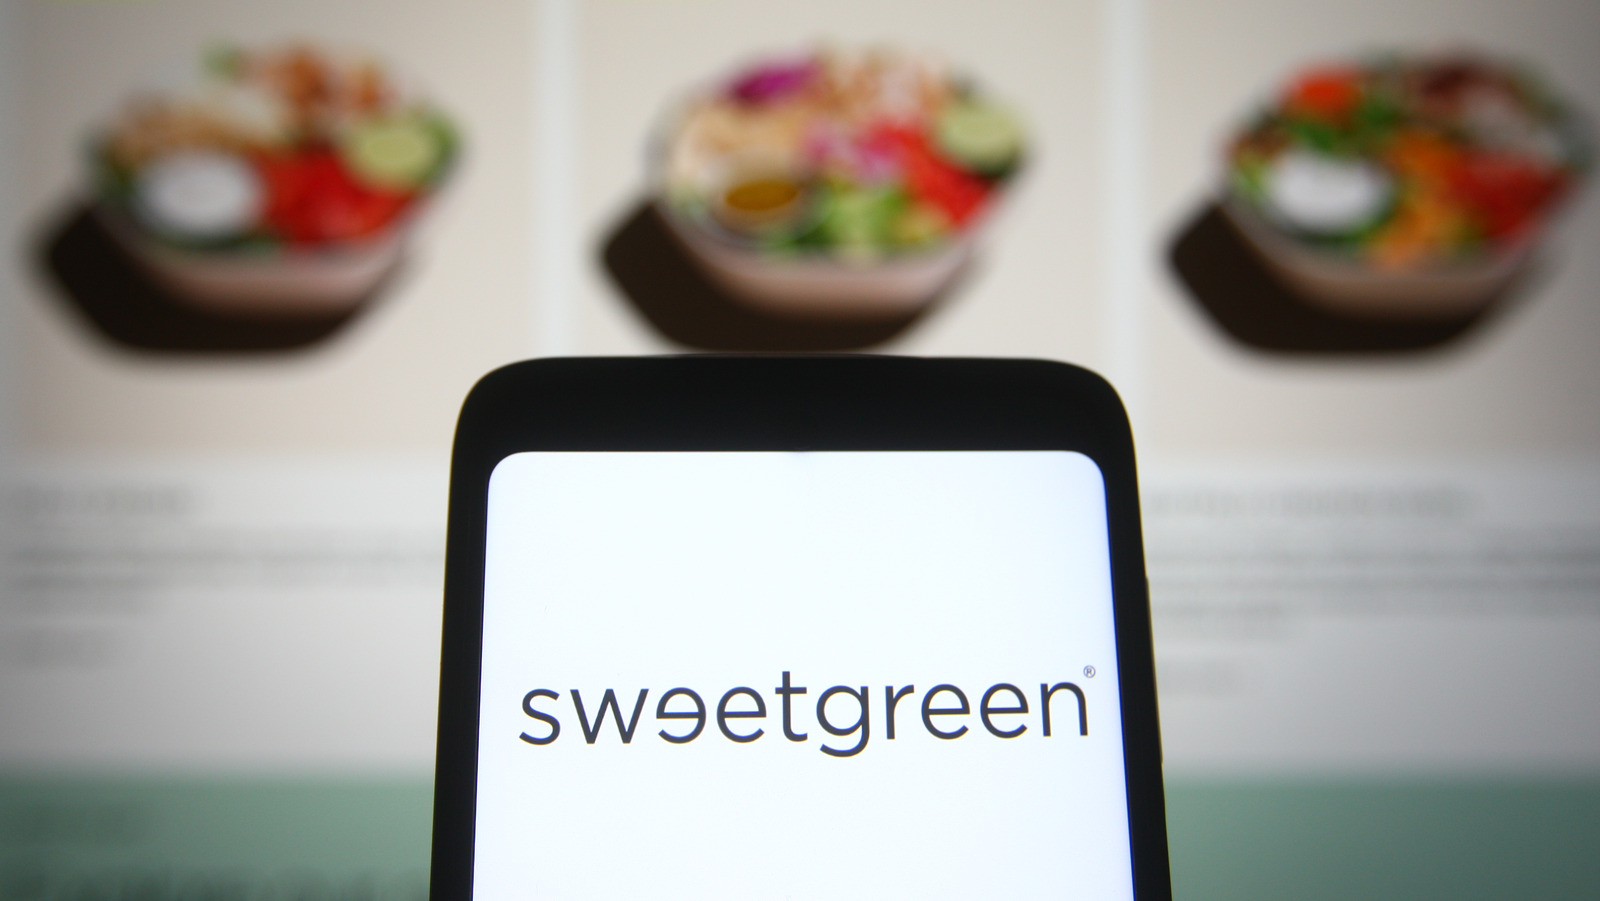 What You Need To Know About Sweetpass, Sweetgreen’s First Loyalty Program In 2 Years – The Daily Meal